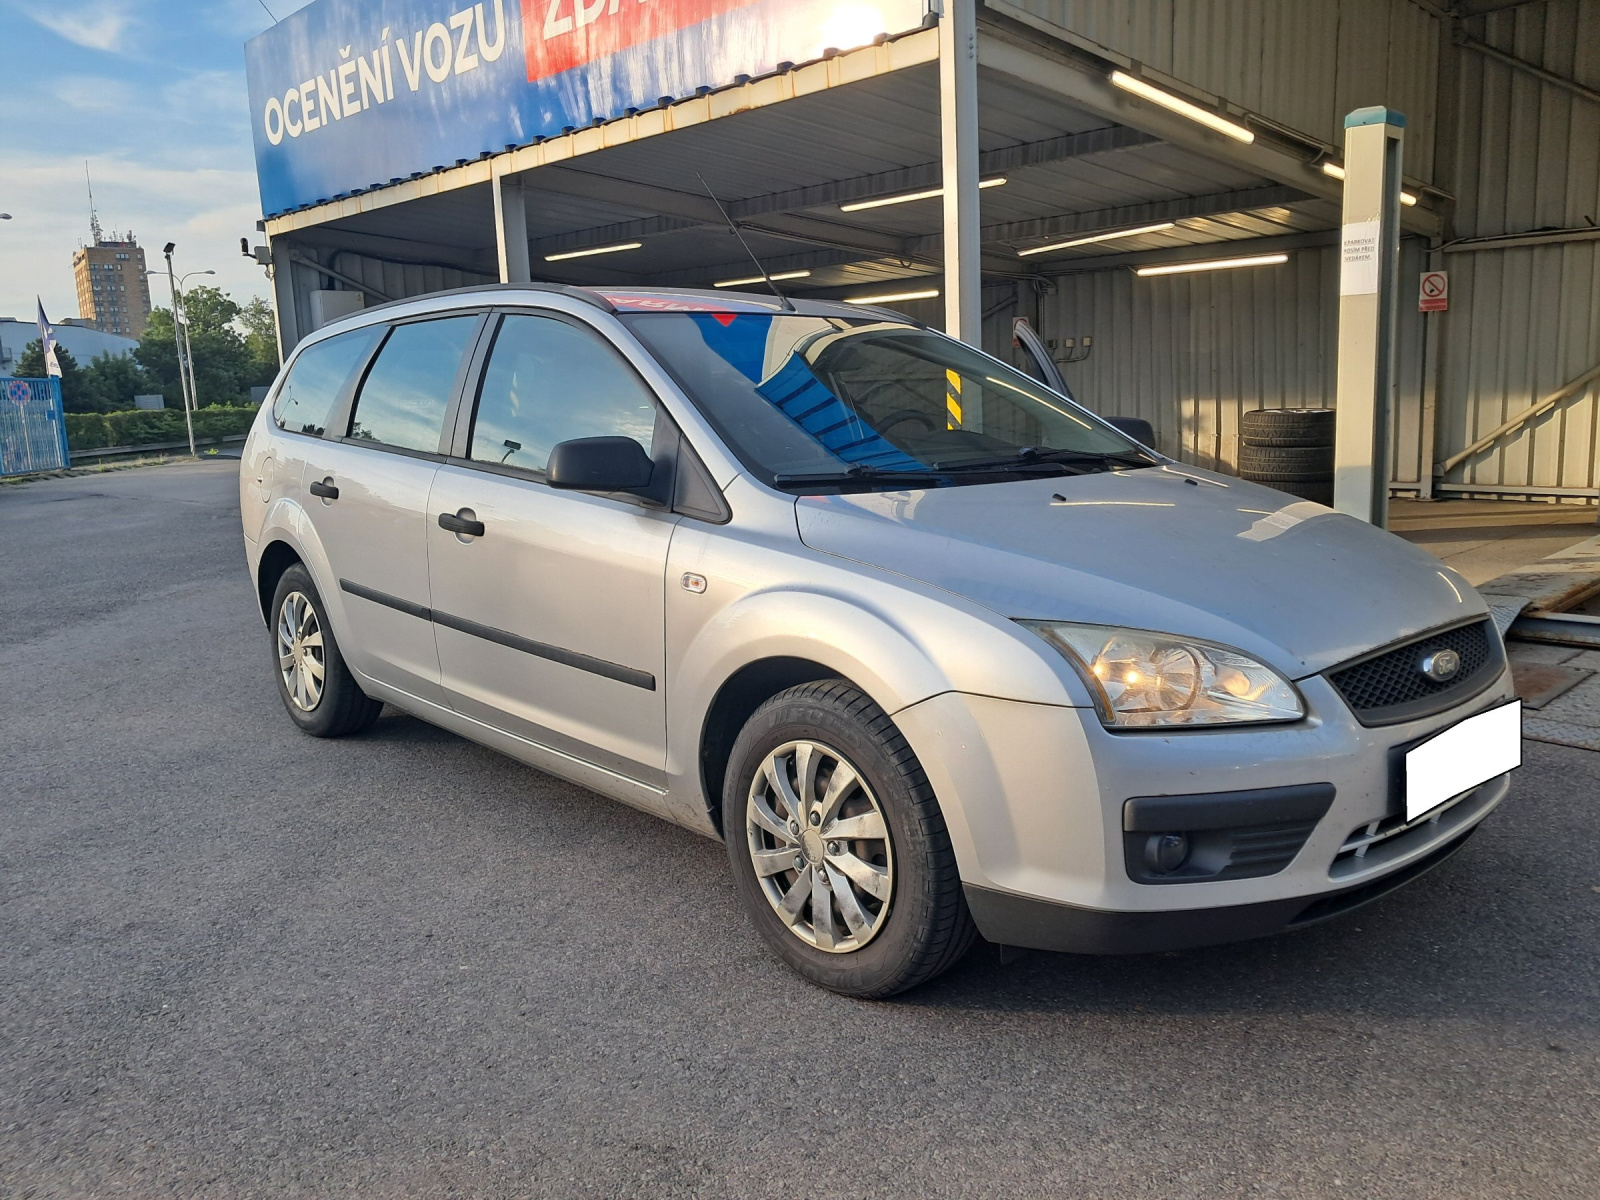 Ford Focus, 2006, 1.6 TDCi, 80kW